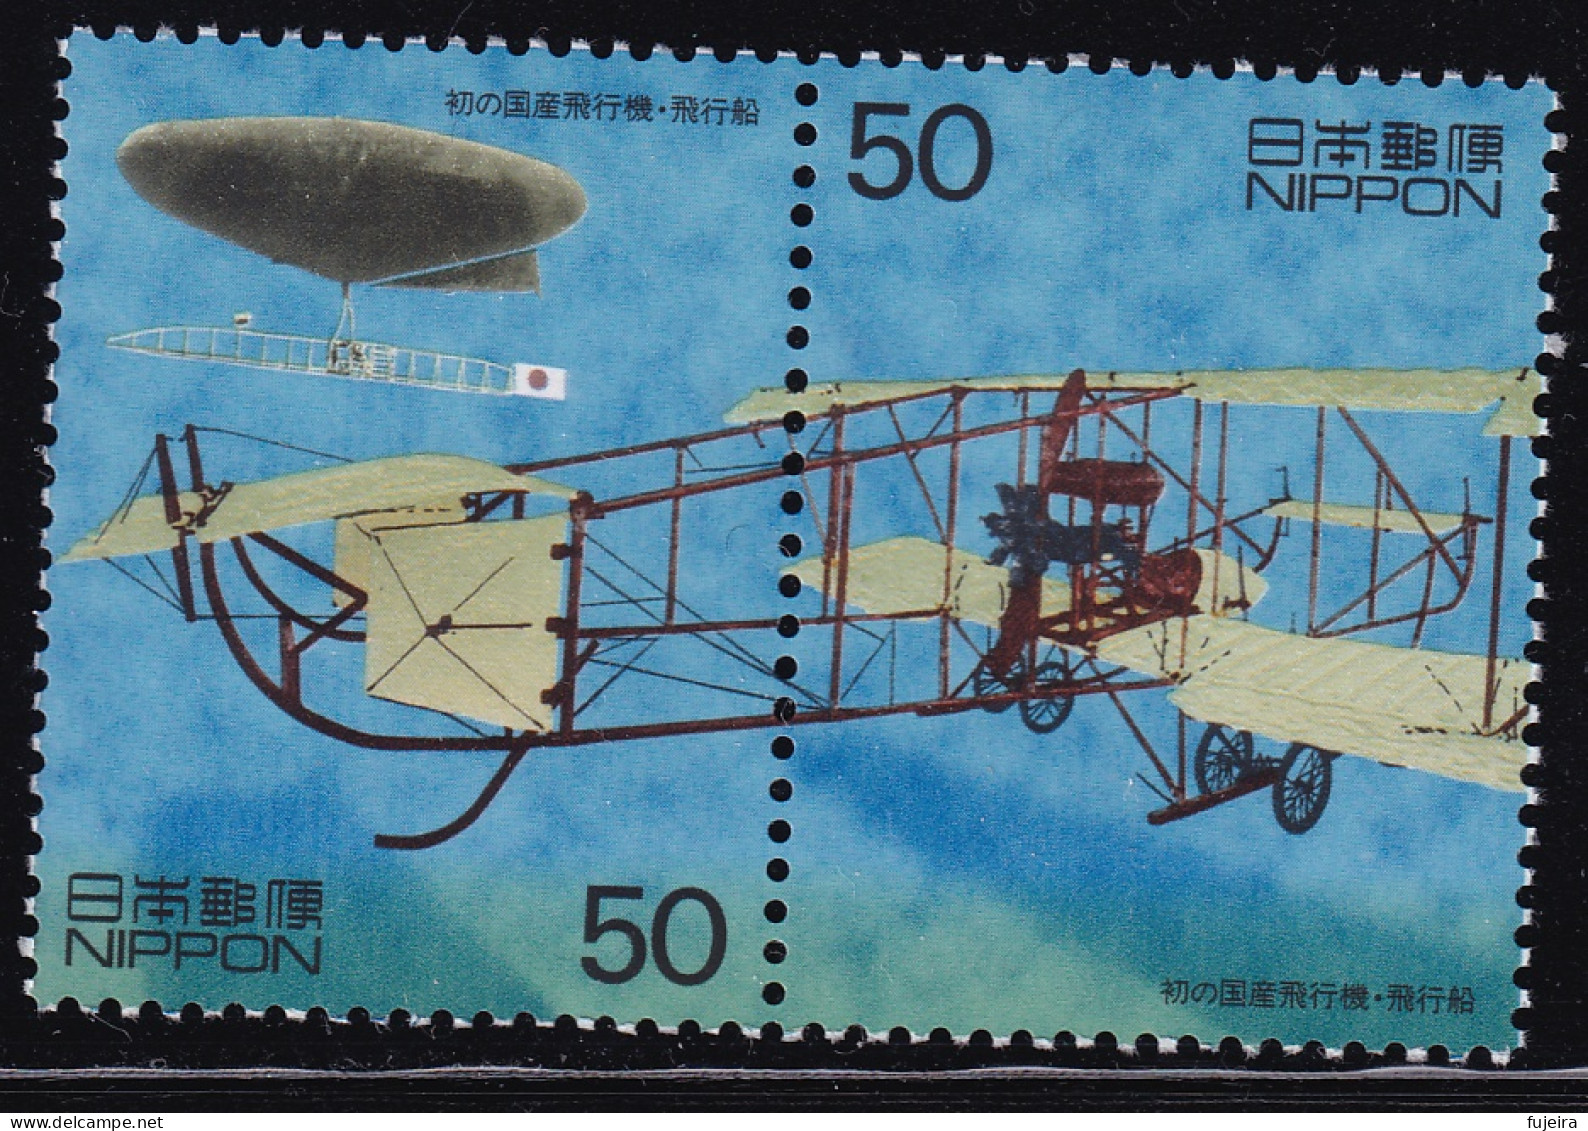 (ds11) Japan 20th Centurry No.2 Airplane Airship MNH - Unused Stamps